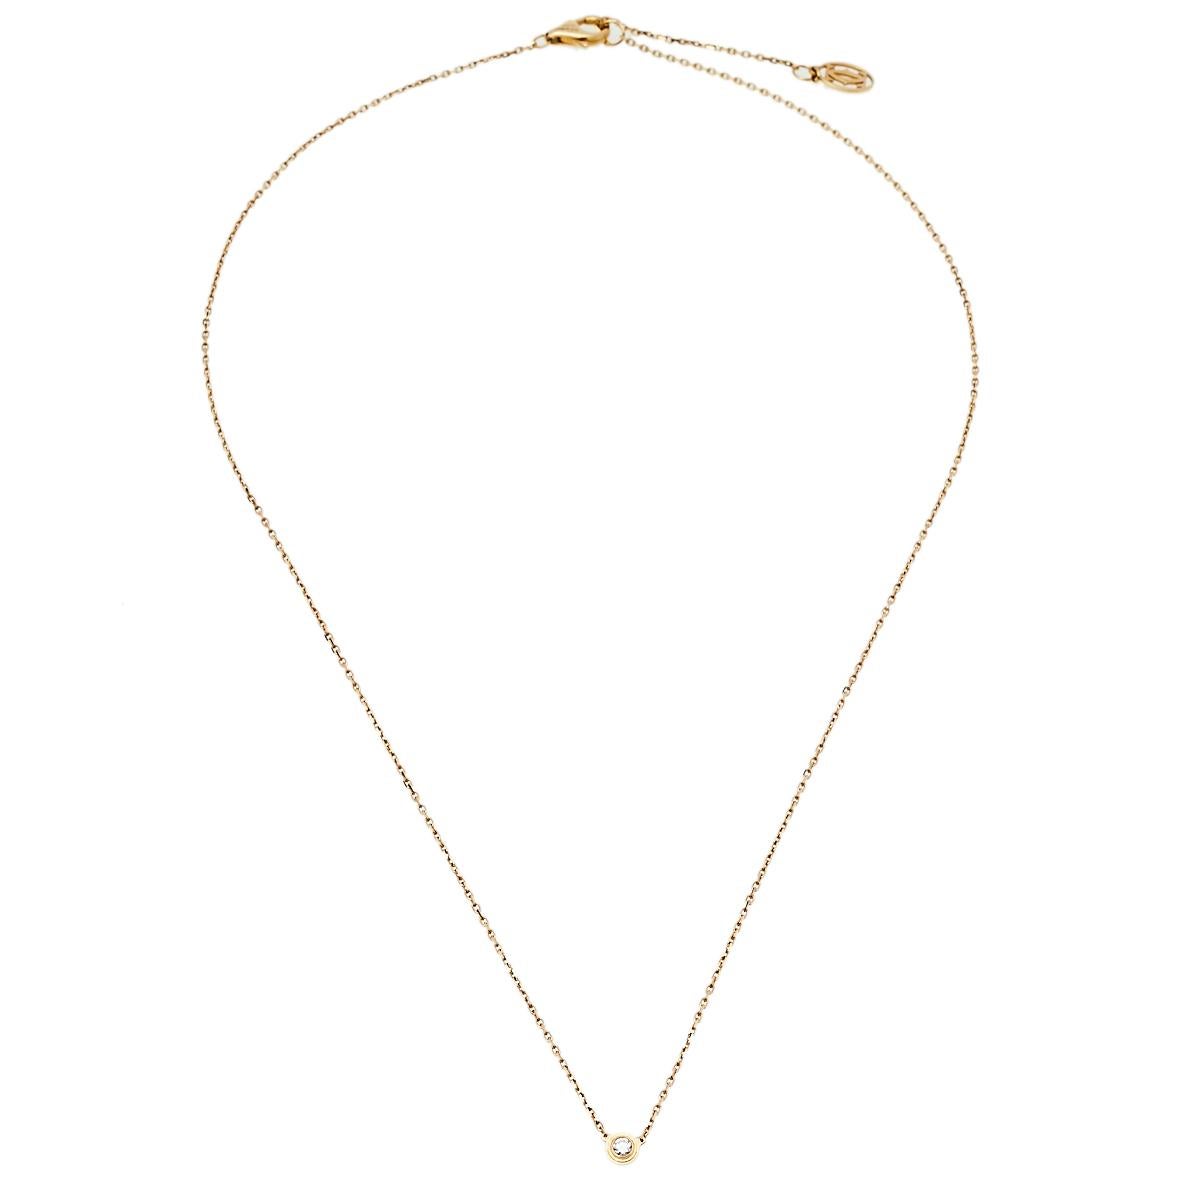 The Diamants Légers collection by Cartier is all about bringing feminine elegance into light by deploying exceptional diamonds into minimalist designs. This necklace rendered in 18k rose gold exhibits just that. It consists of a simple chain design